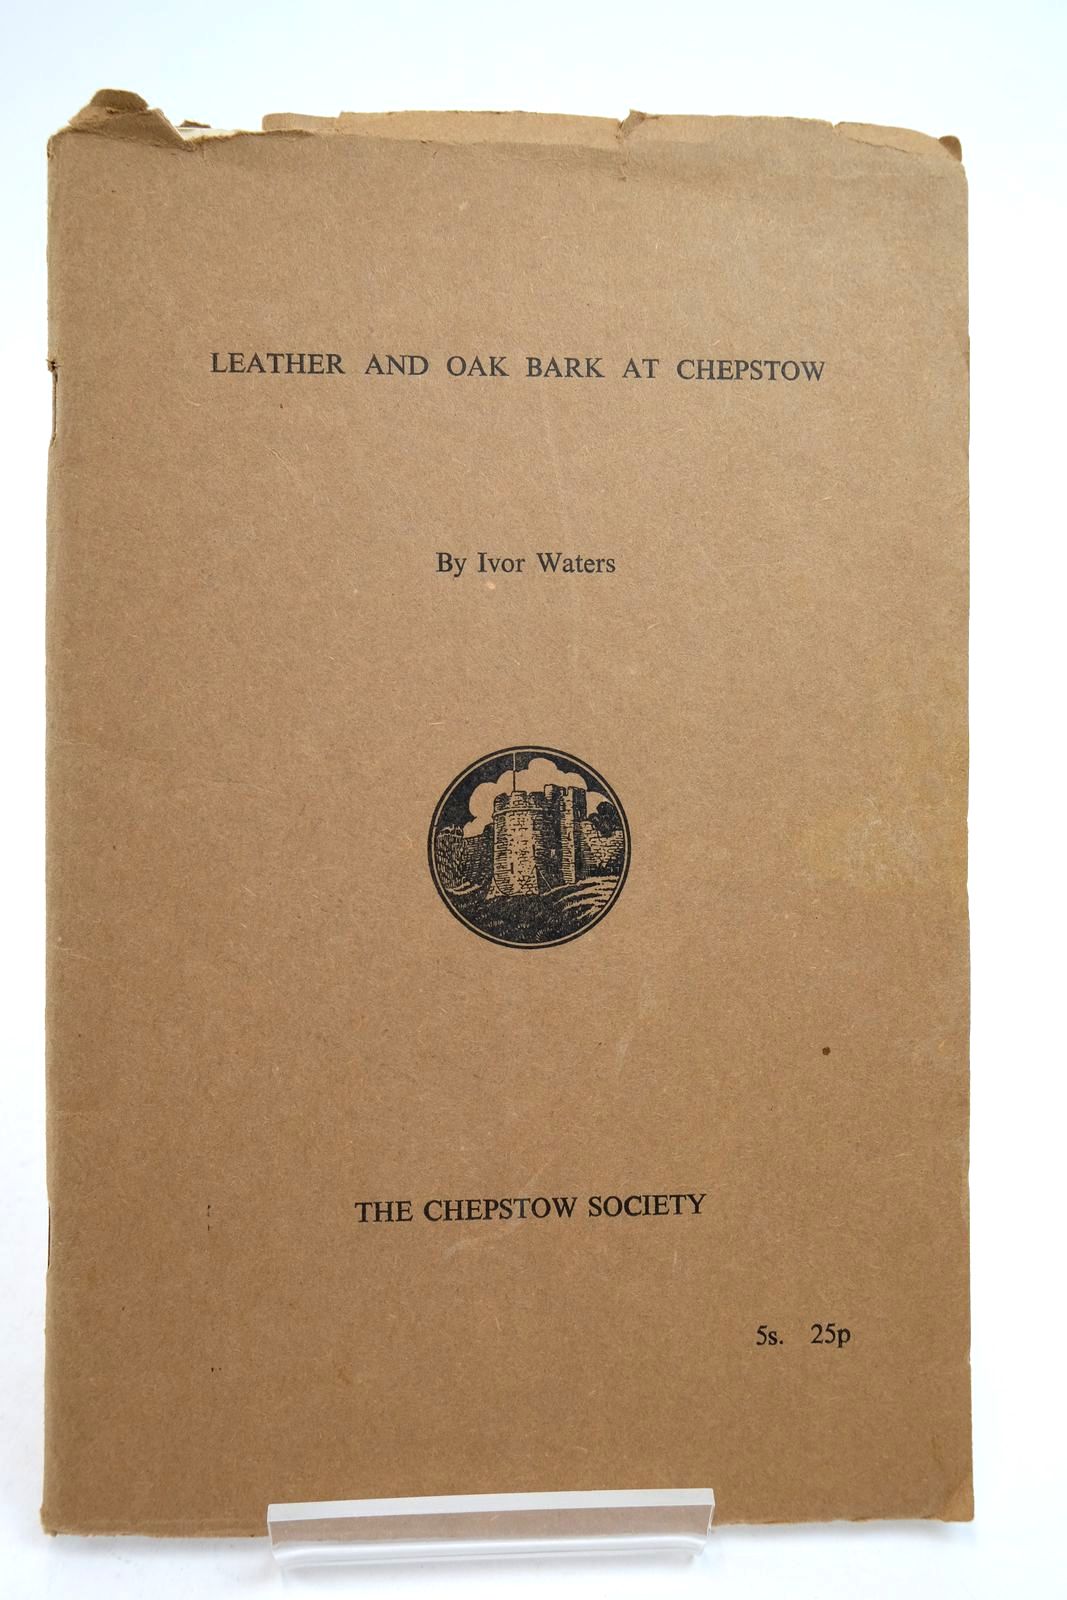 Photo of LEATHER AND OAK BARK AT CHEPSTOW written by Waters, Ivor published by The Chepstow Society (STOCK CODE: 2140449)  for sale by Stella & Rose's Books